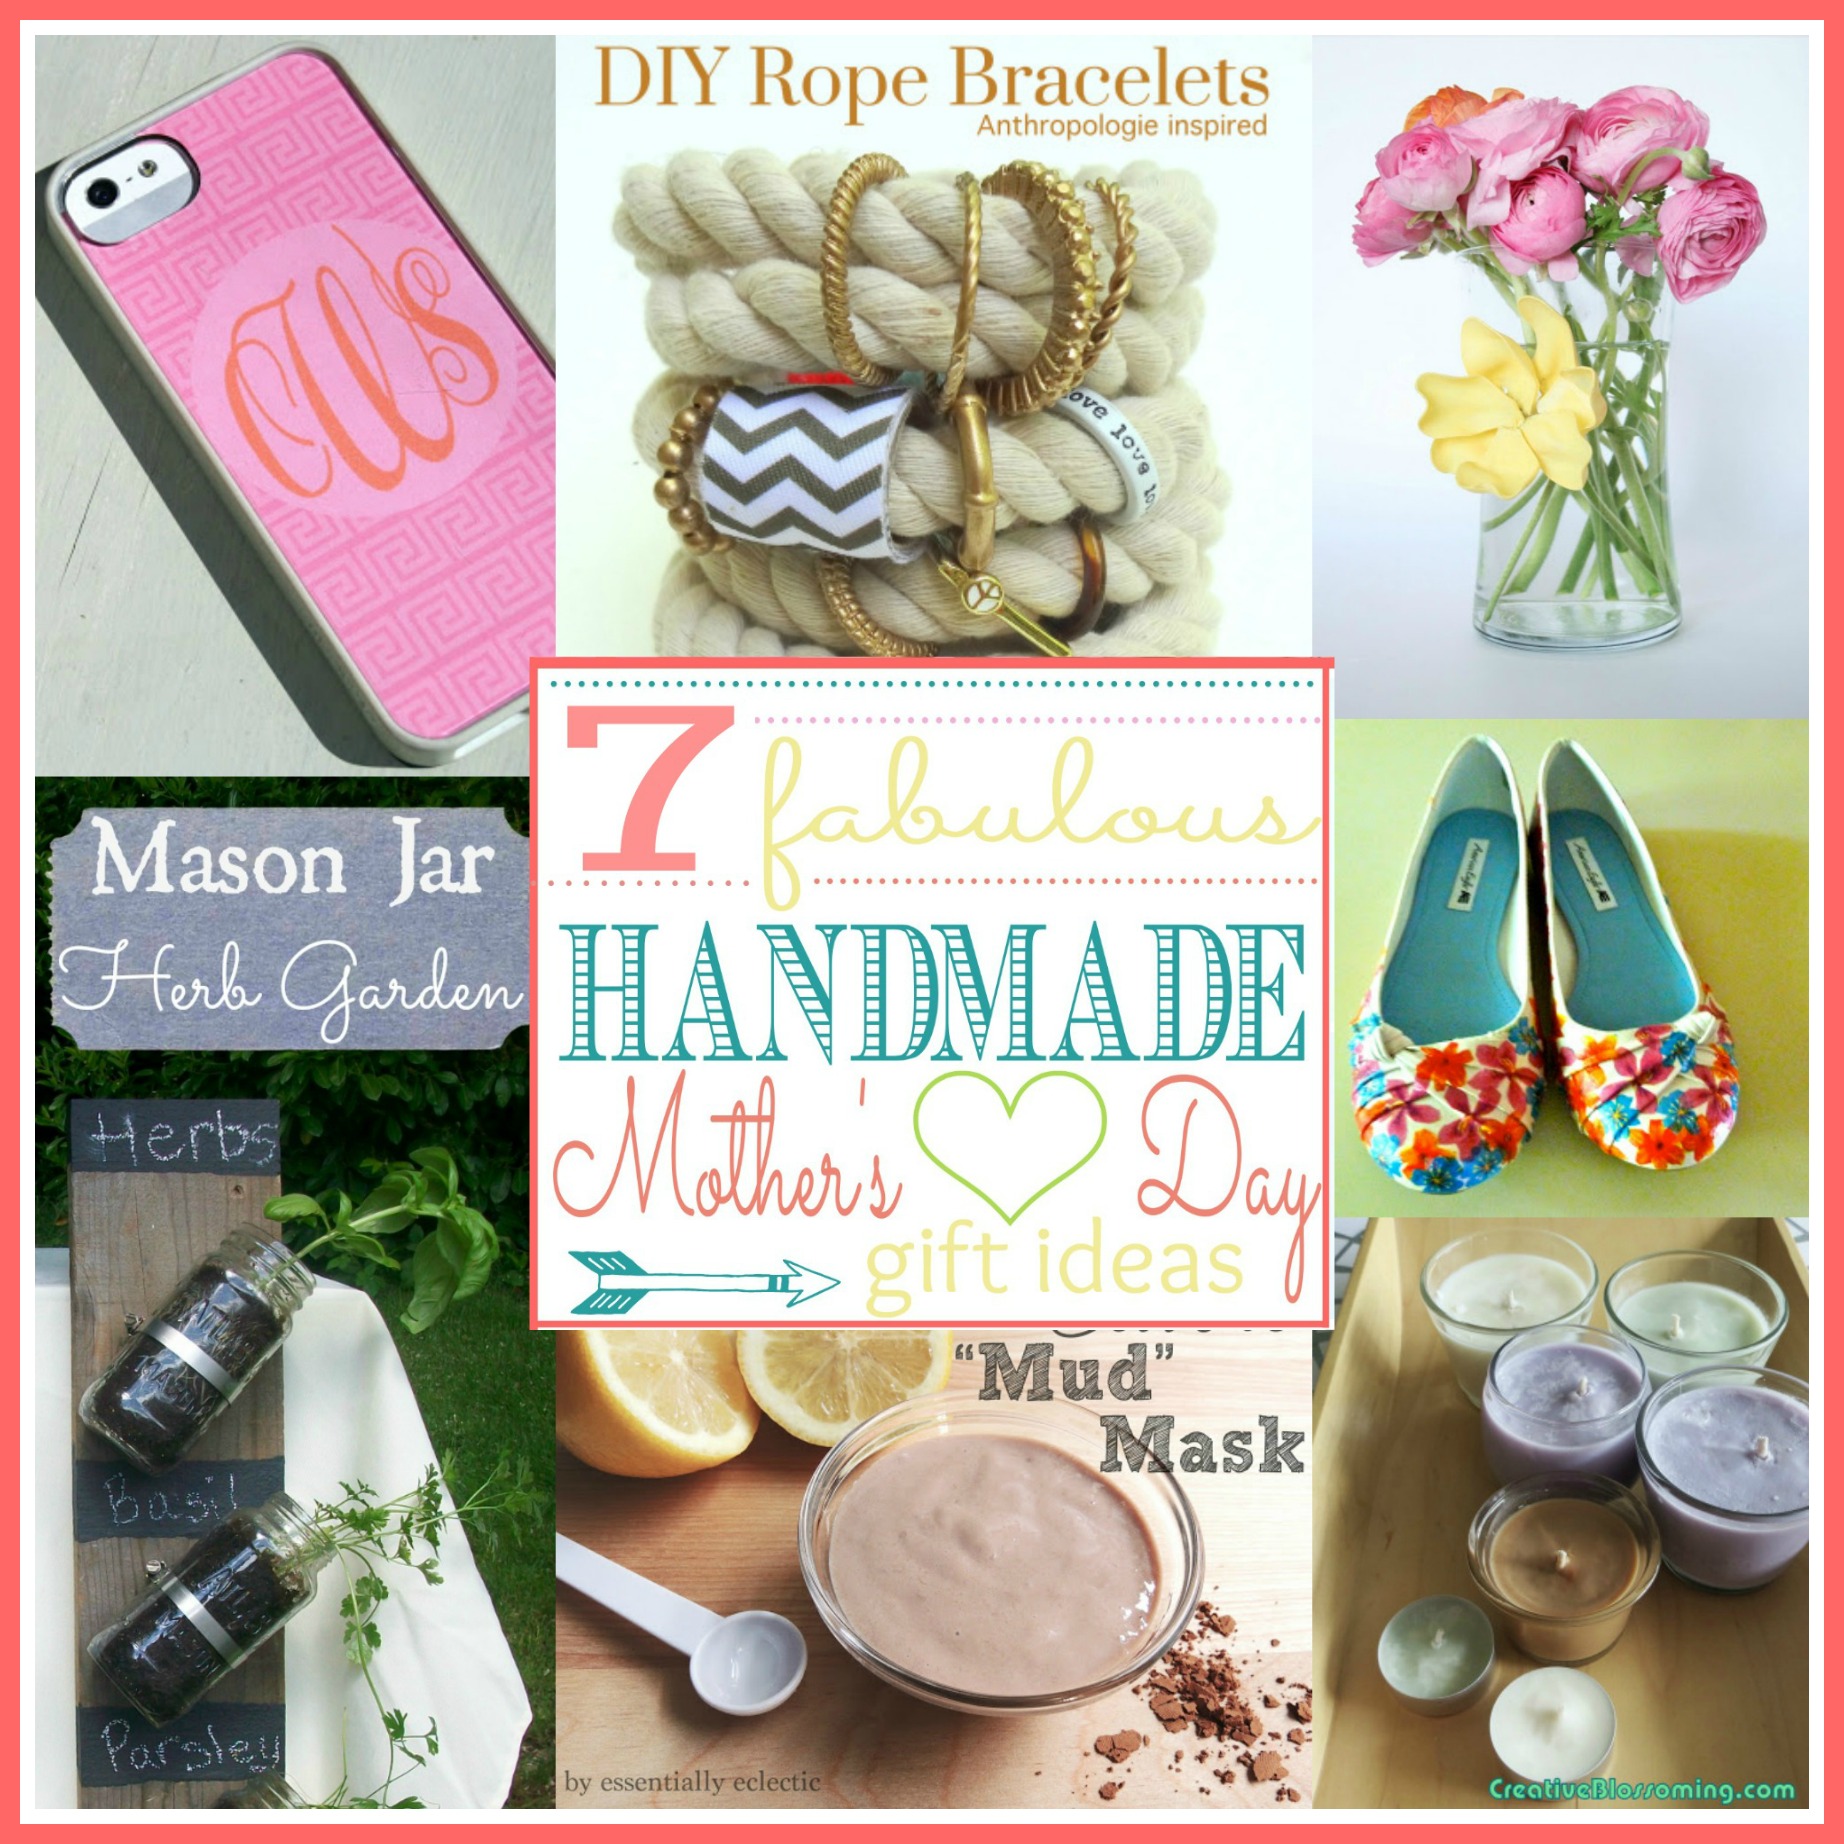 10 Quick & Easy Last Minute Mother's Day Gifts - Everyday Party Magazine